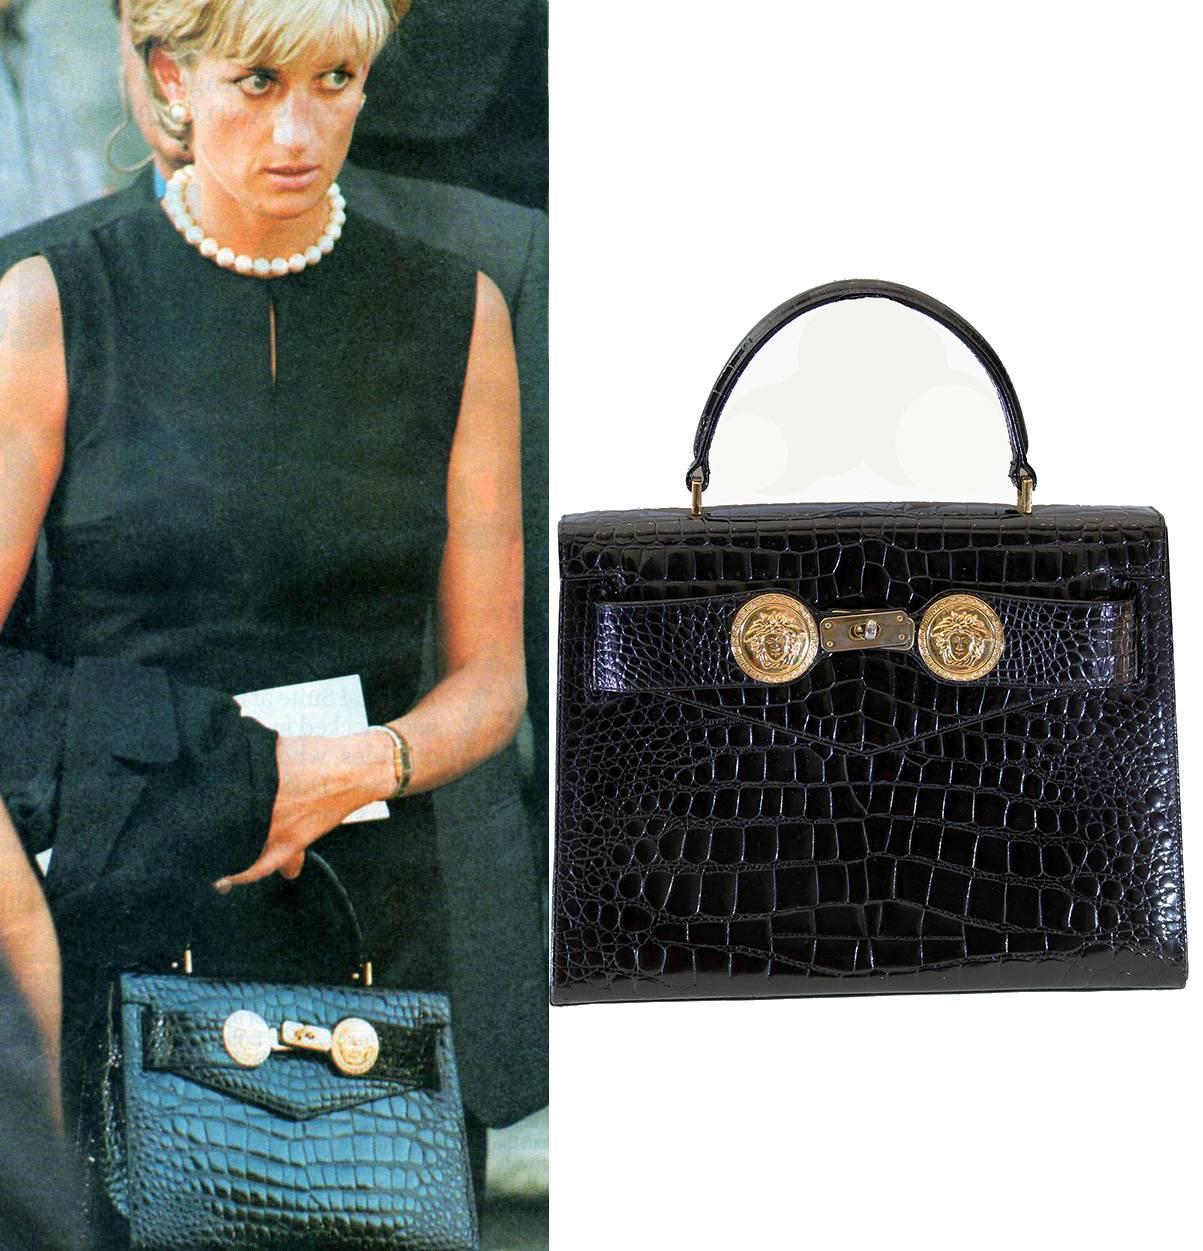 HIGHLY COLLECTIBLE 

GIANNI VERSACE COUTURE 

EVENING HANDBAG

THE SAME BAG THAT PRINCESS DIANA OWNED

Black Croc printed handbag is finished with gold tone hardware. 

Slight wear on the clasp. 

W 12 H 9 D 4

Don't miss this rare